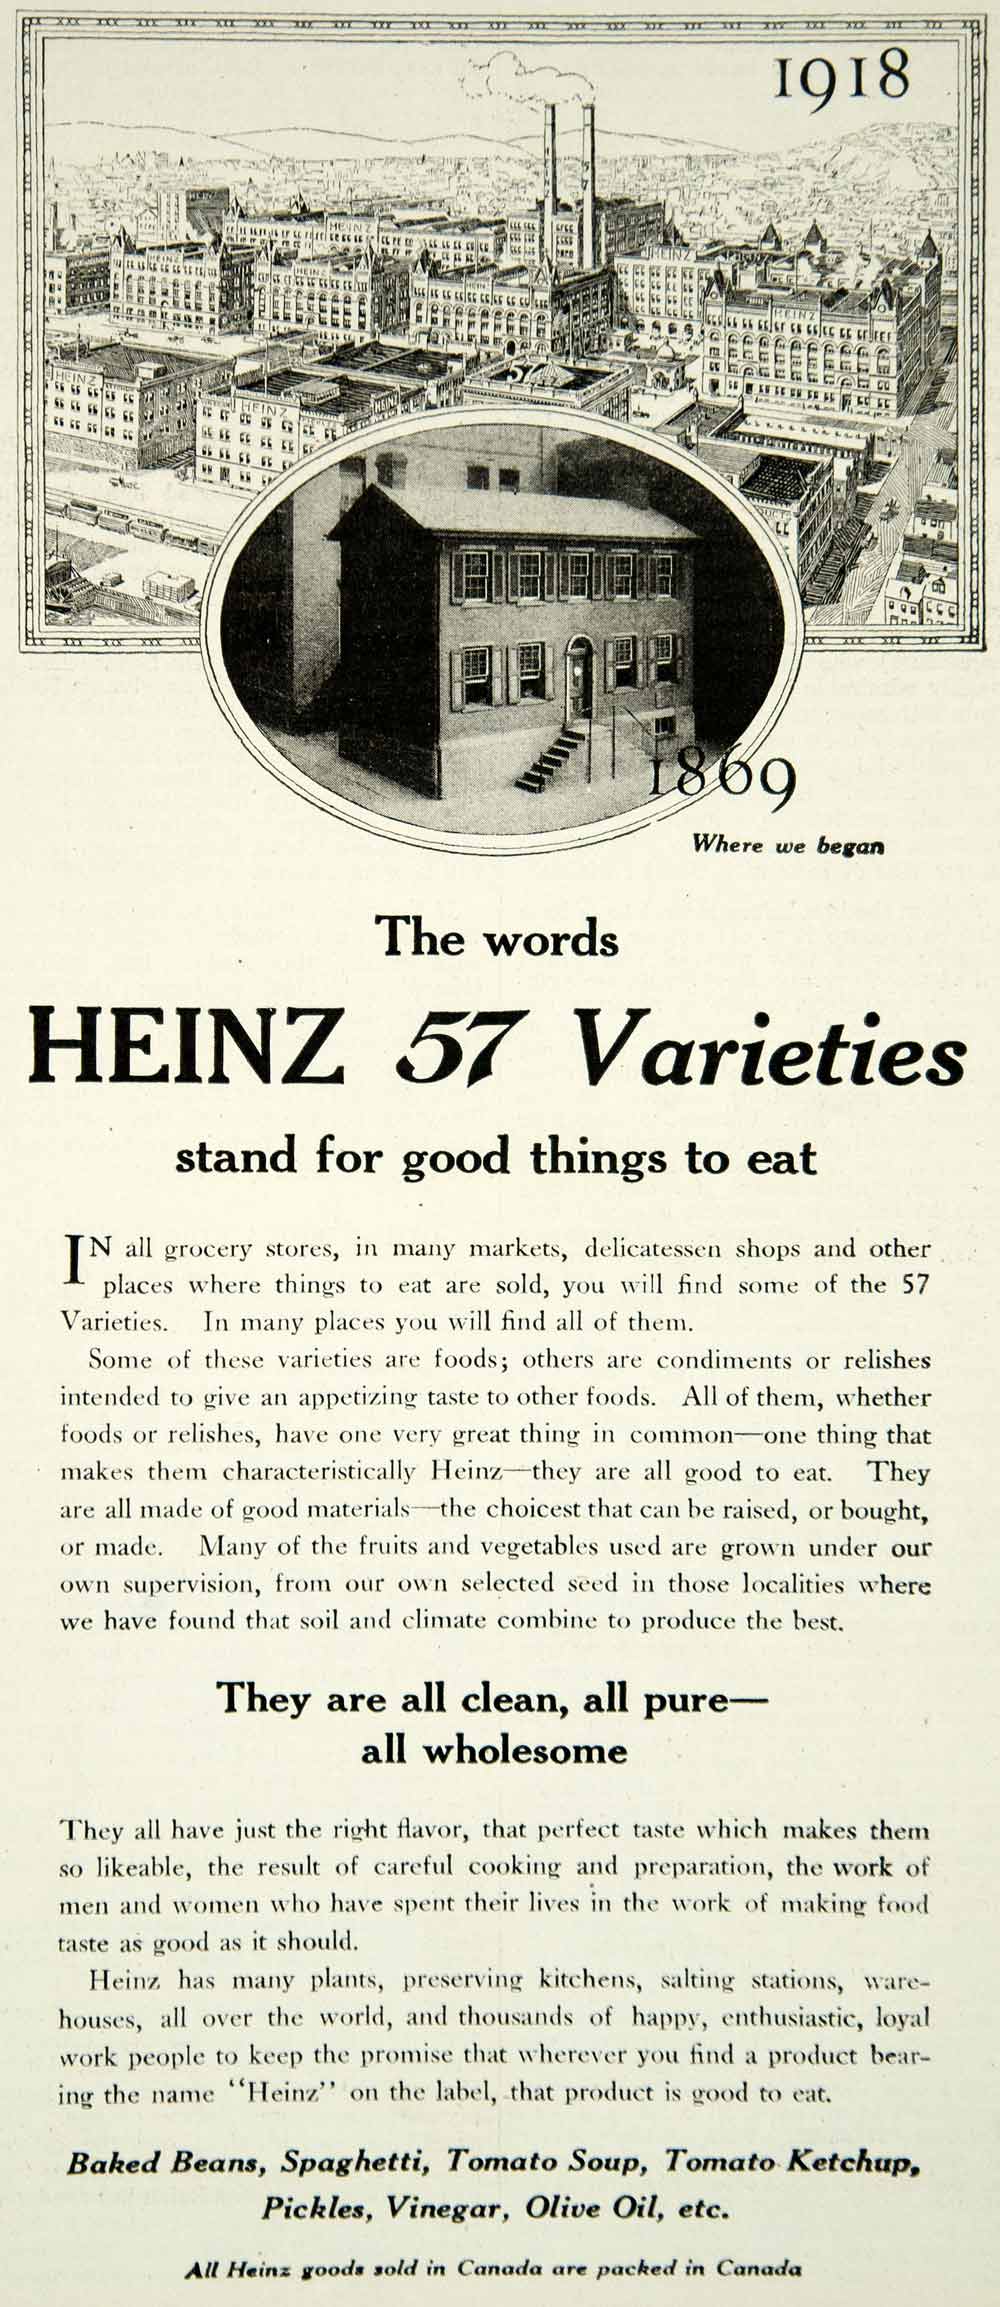 1918 Ad Heinz 57 Varieties Baked Beans Spaghetti Tomato Soup Ketchup YLD1